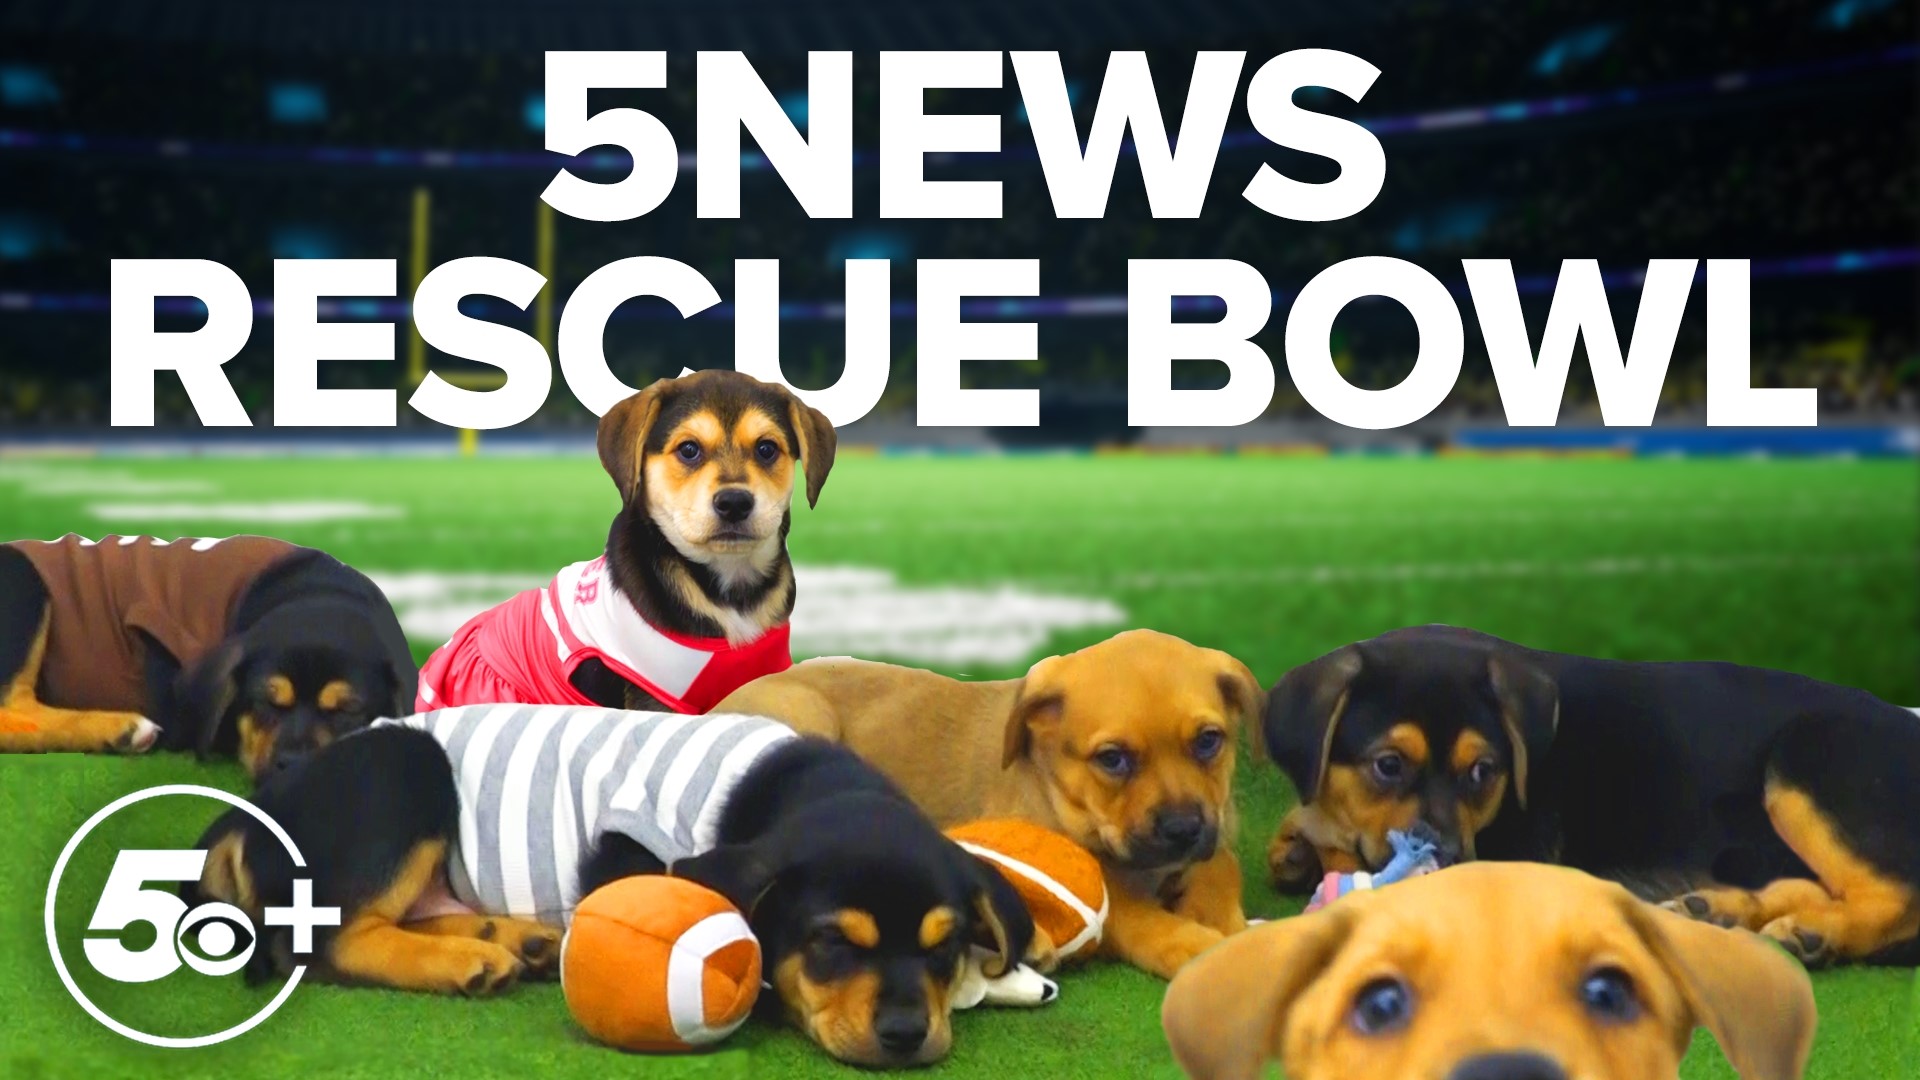 5NEWS is at the Best Friends Pet Resource Center in Bentonville for the sporting event of the year: the 5NEWS Rescue Bowl.